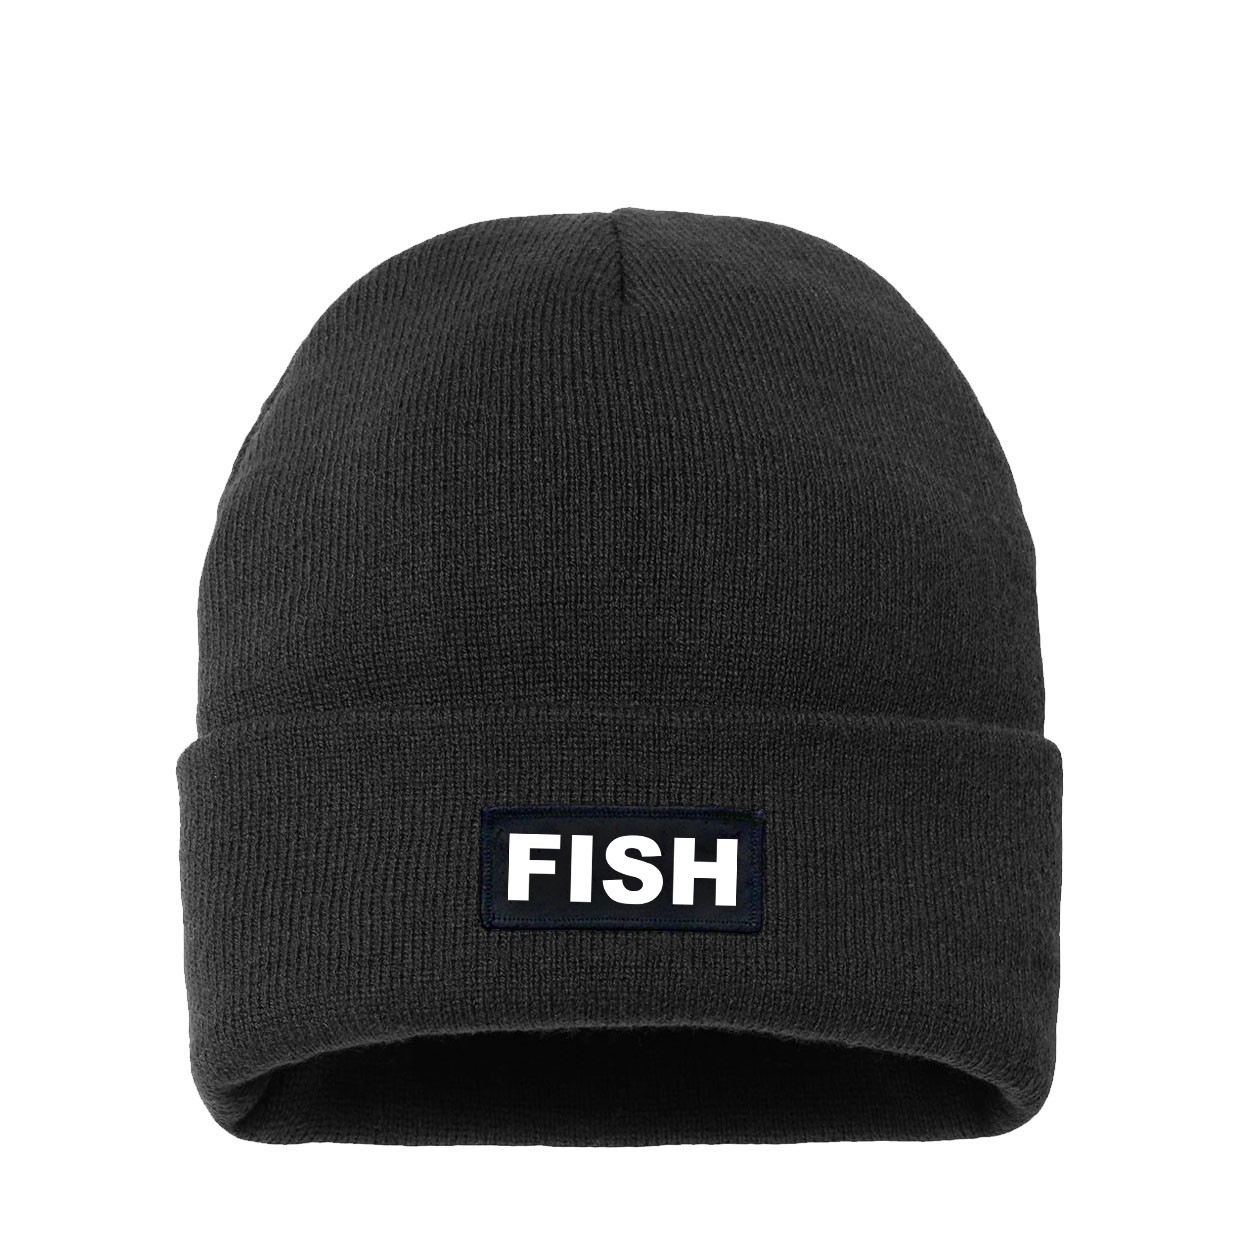 Fish Brand Logo Night Out Woven Patch Night Out Sherpa Lined Cuffed Beanie Black (White Logo)